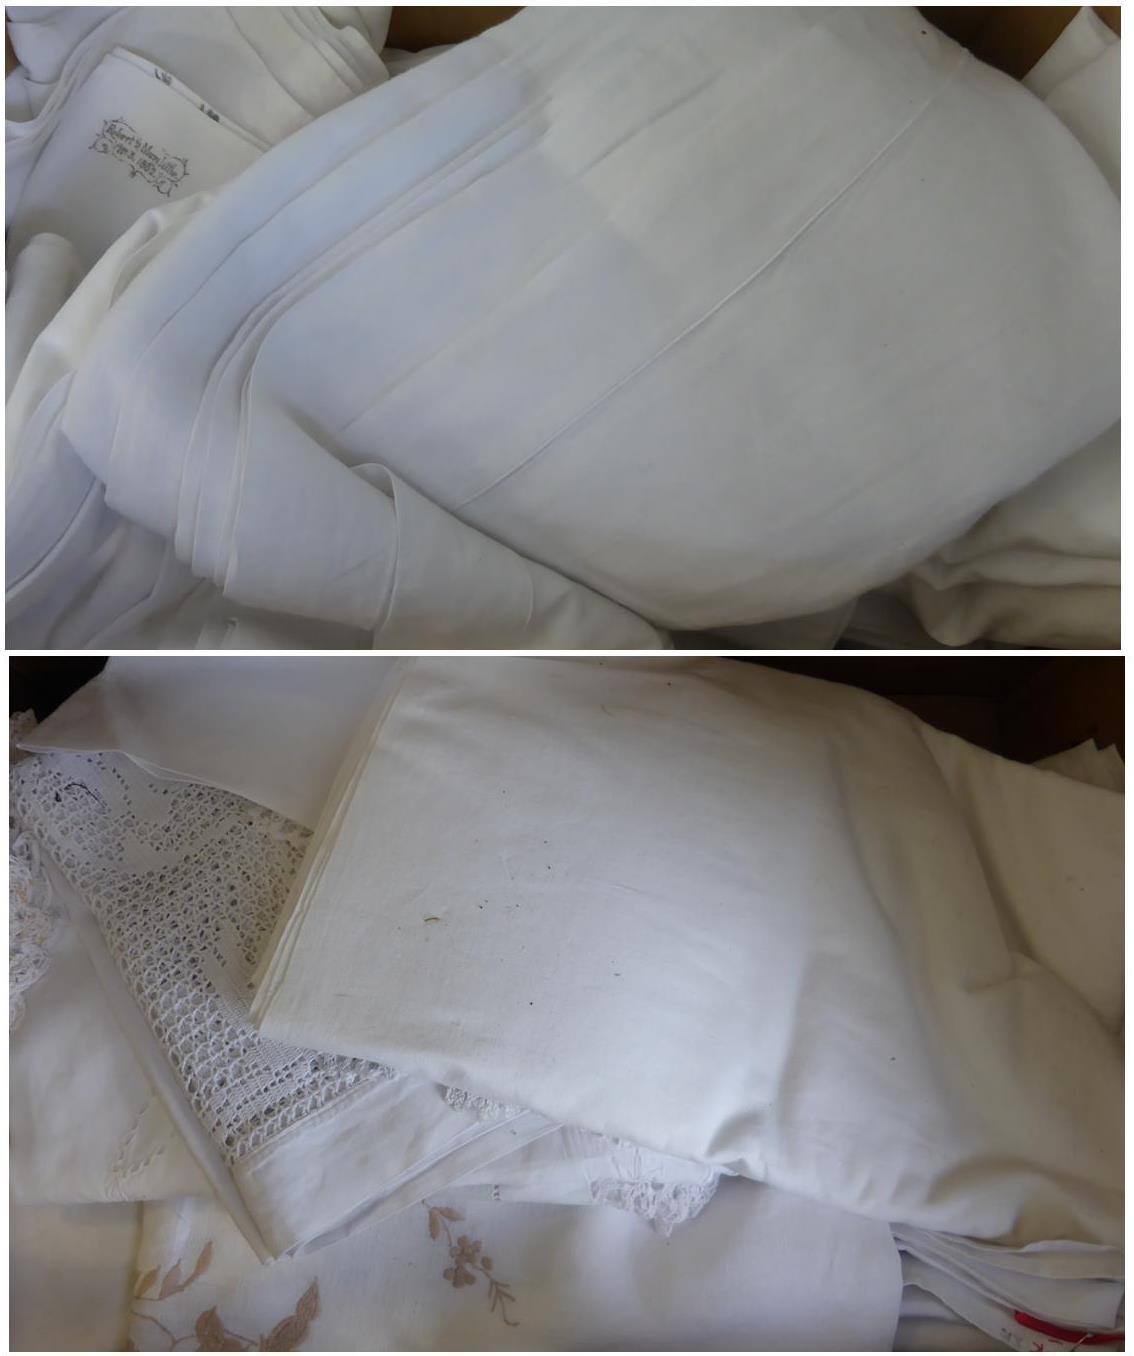 Lot 1025 - Assorted White Cotton, Linen and Textiles including damask cloths, bed linen, embroidered table...